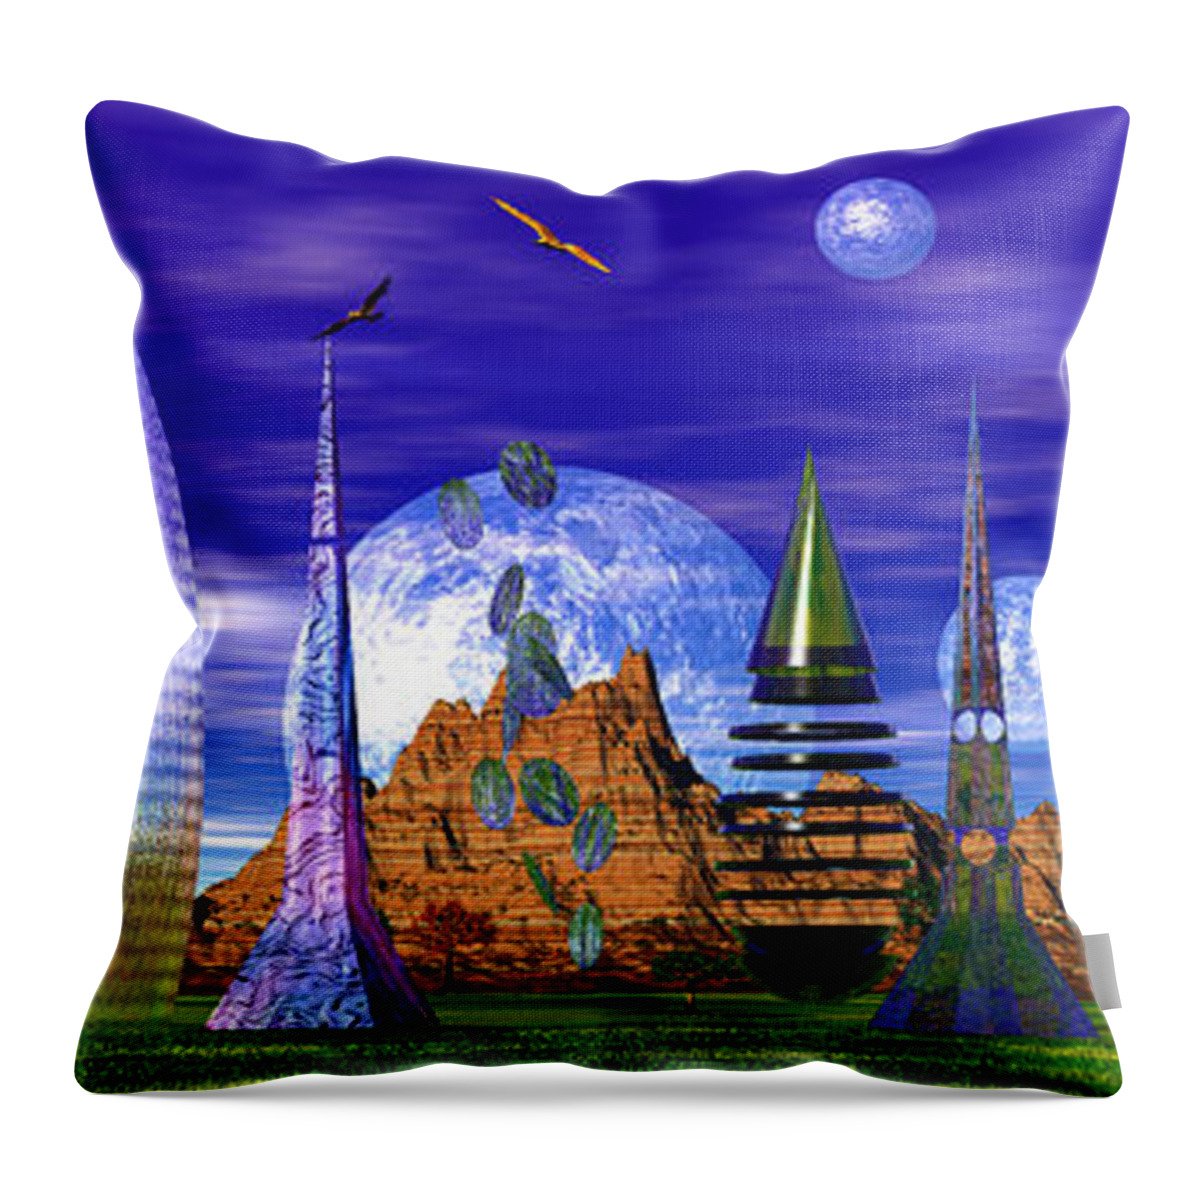 Landscape Throw Pillow featuring the photograph The Squorkle Of Squerkle by Mark Blauhoefer